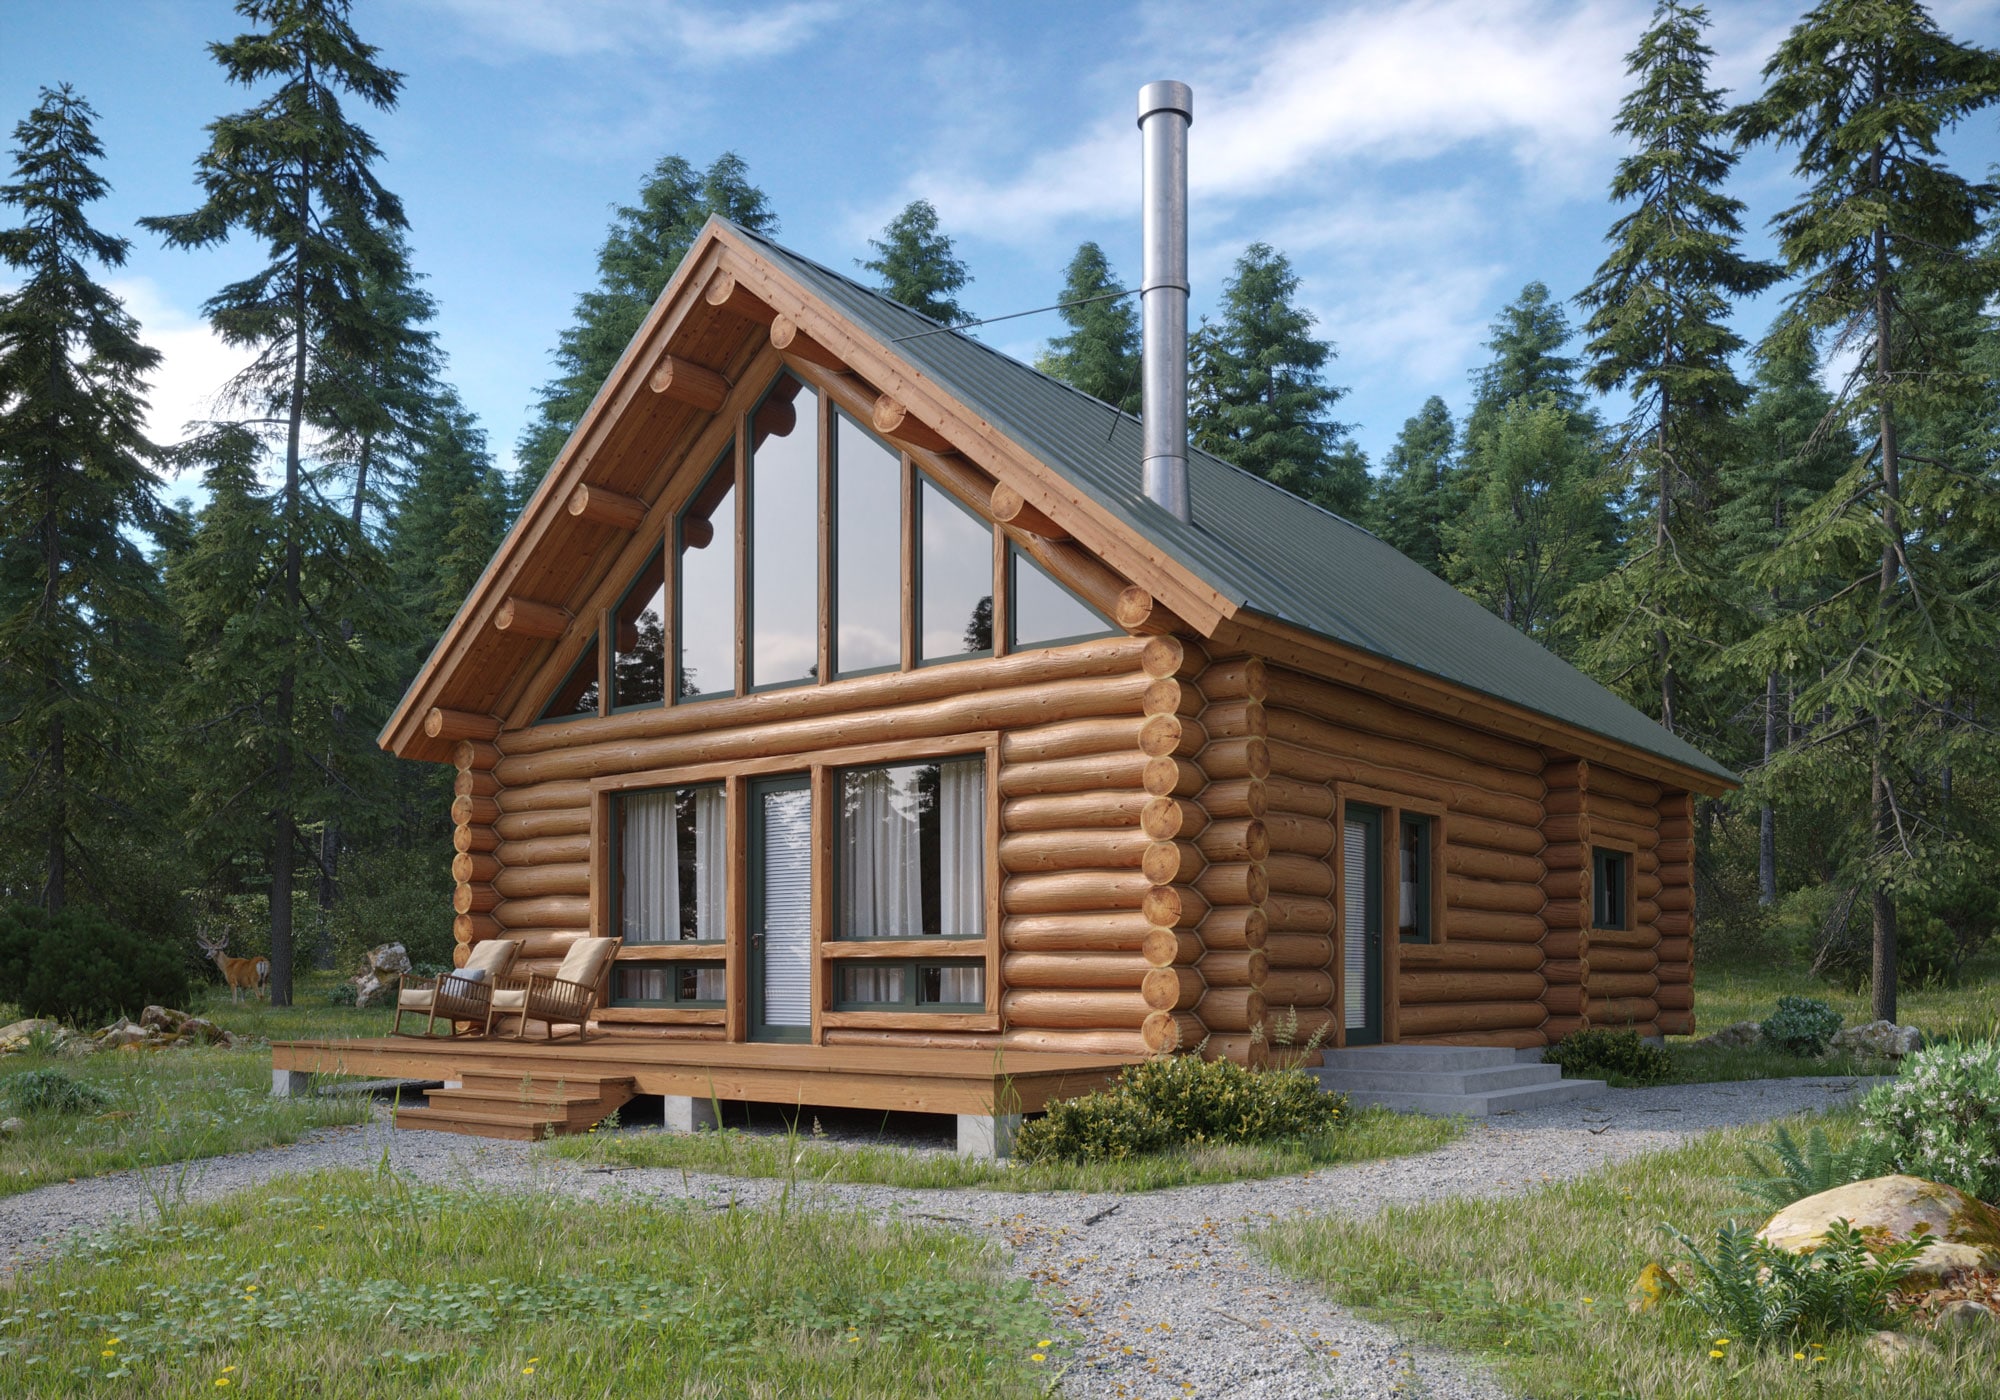 Log Homes: Achieving Rustic Looks Without Western Inspiration